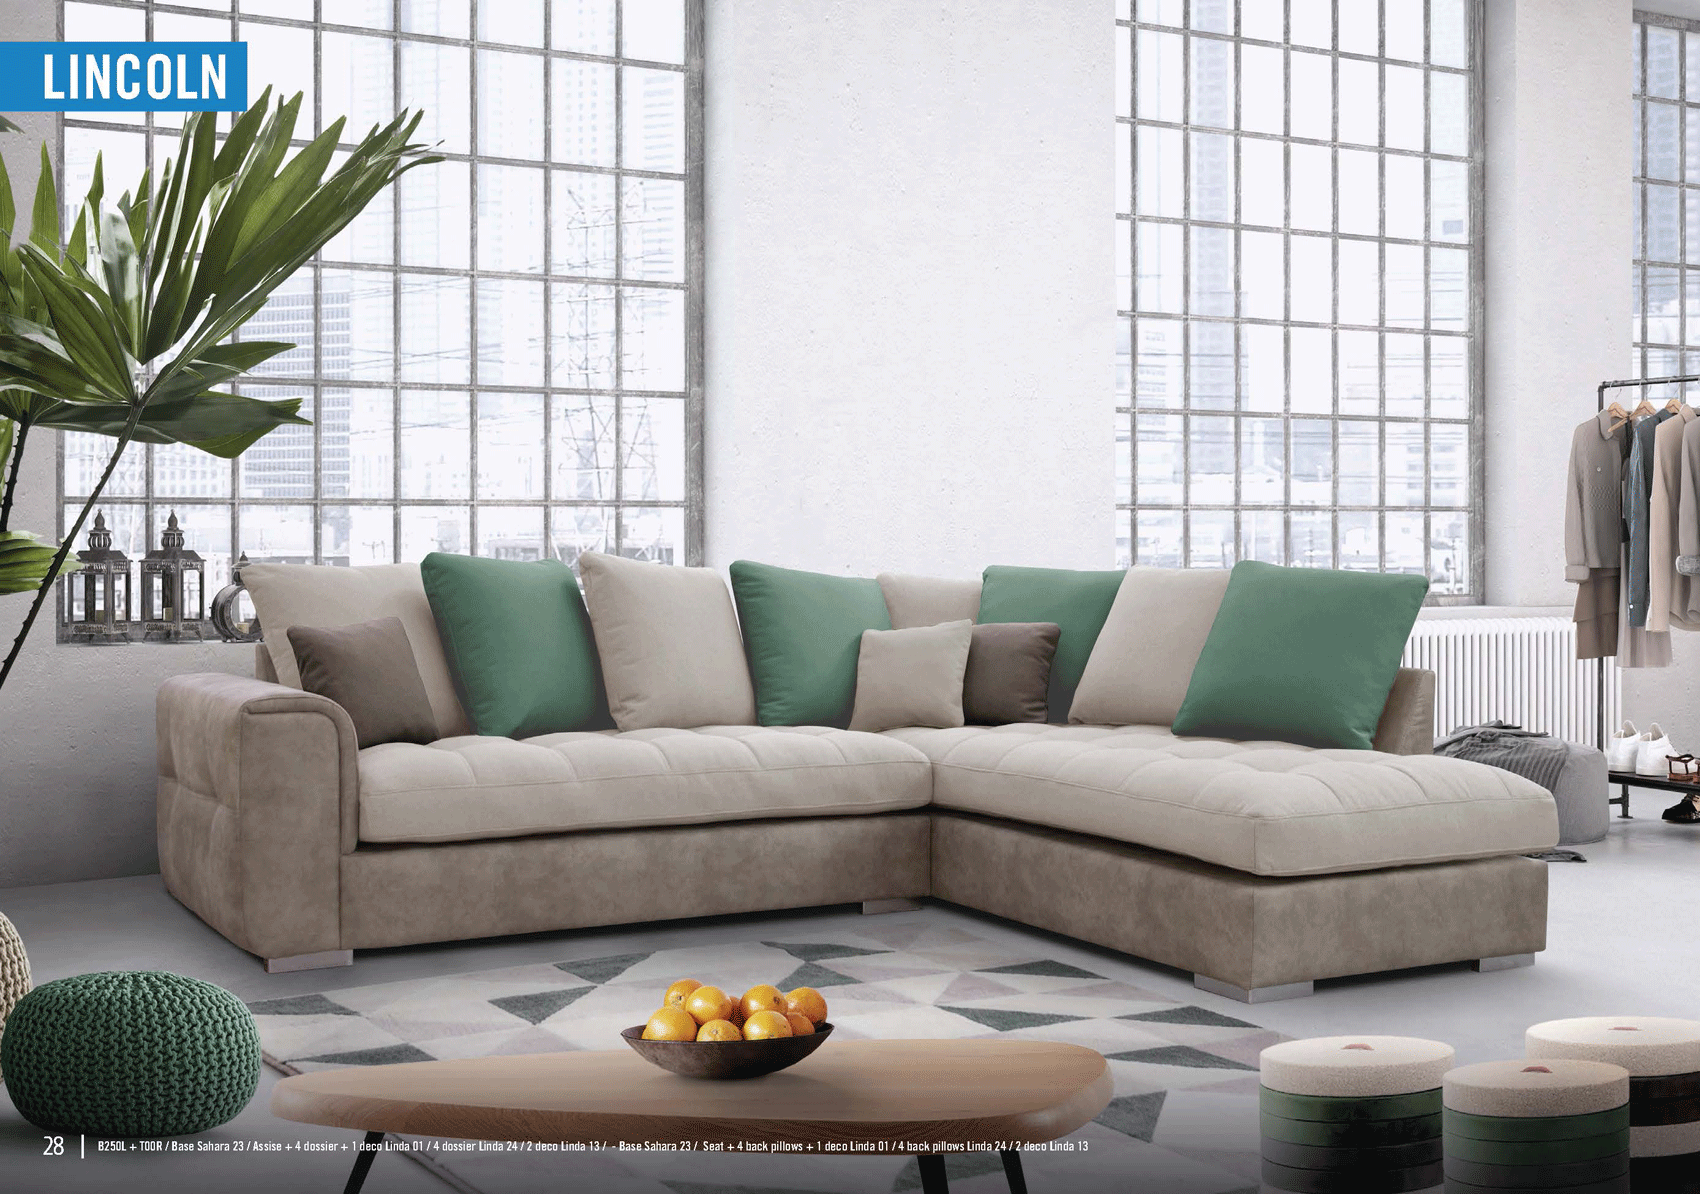 Brands European Living Collection Lincoln Sectional